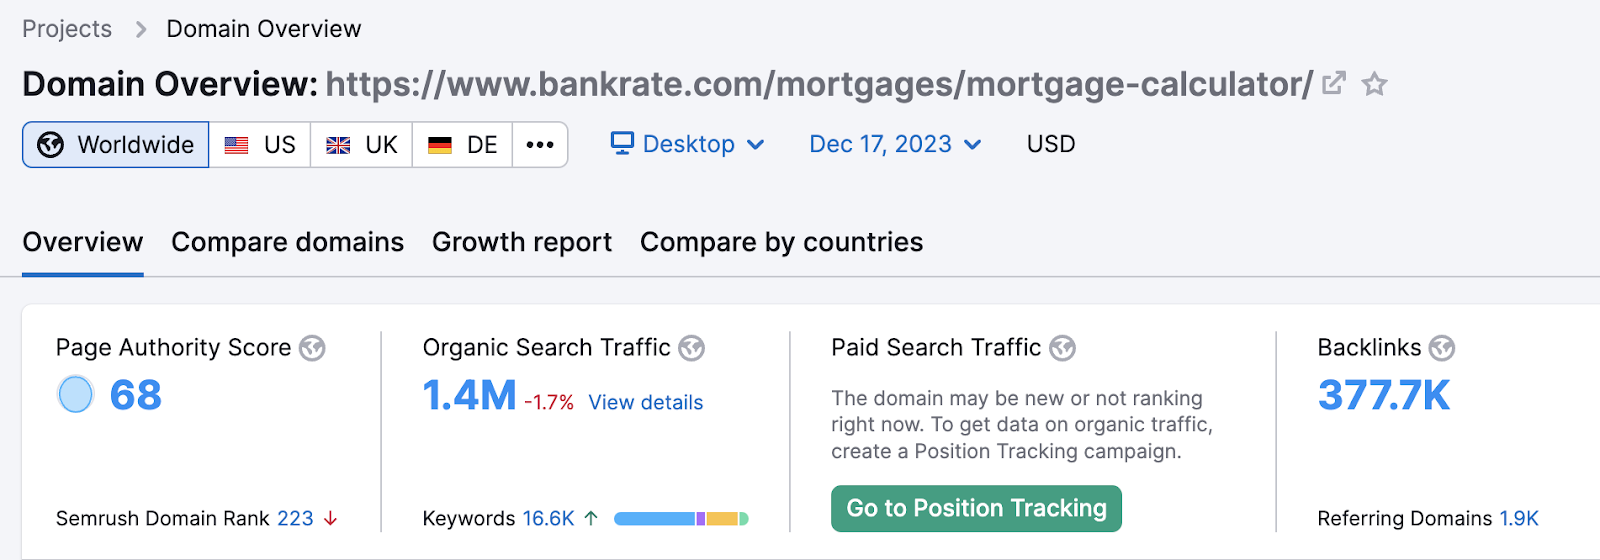 Domain Overview results for "https://www-bankrate.com/mortgages/mortgage-calculator/" site